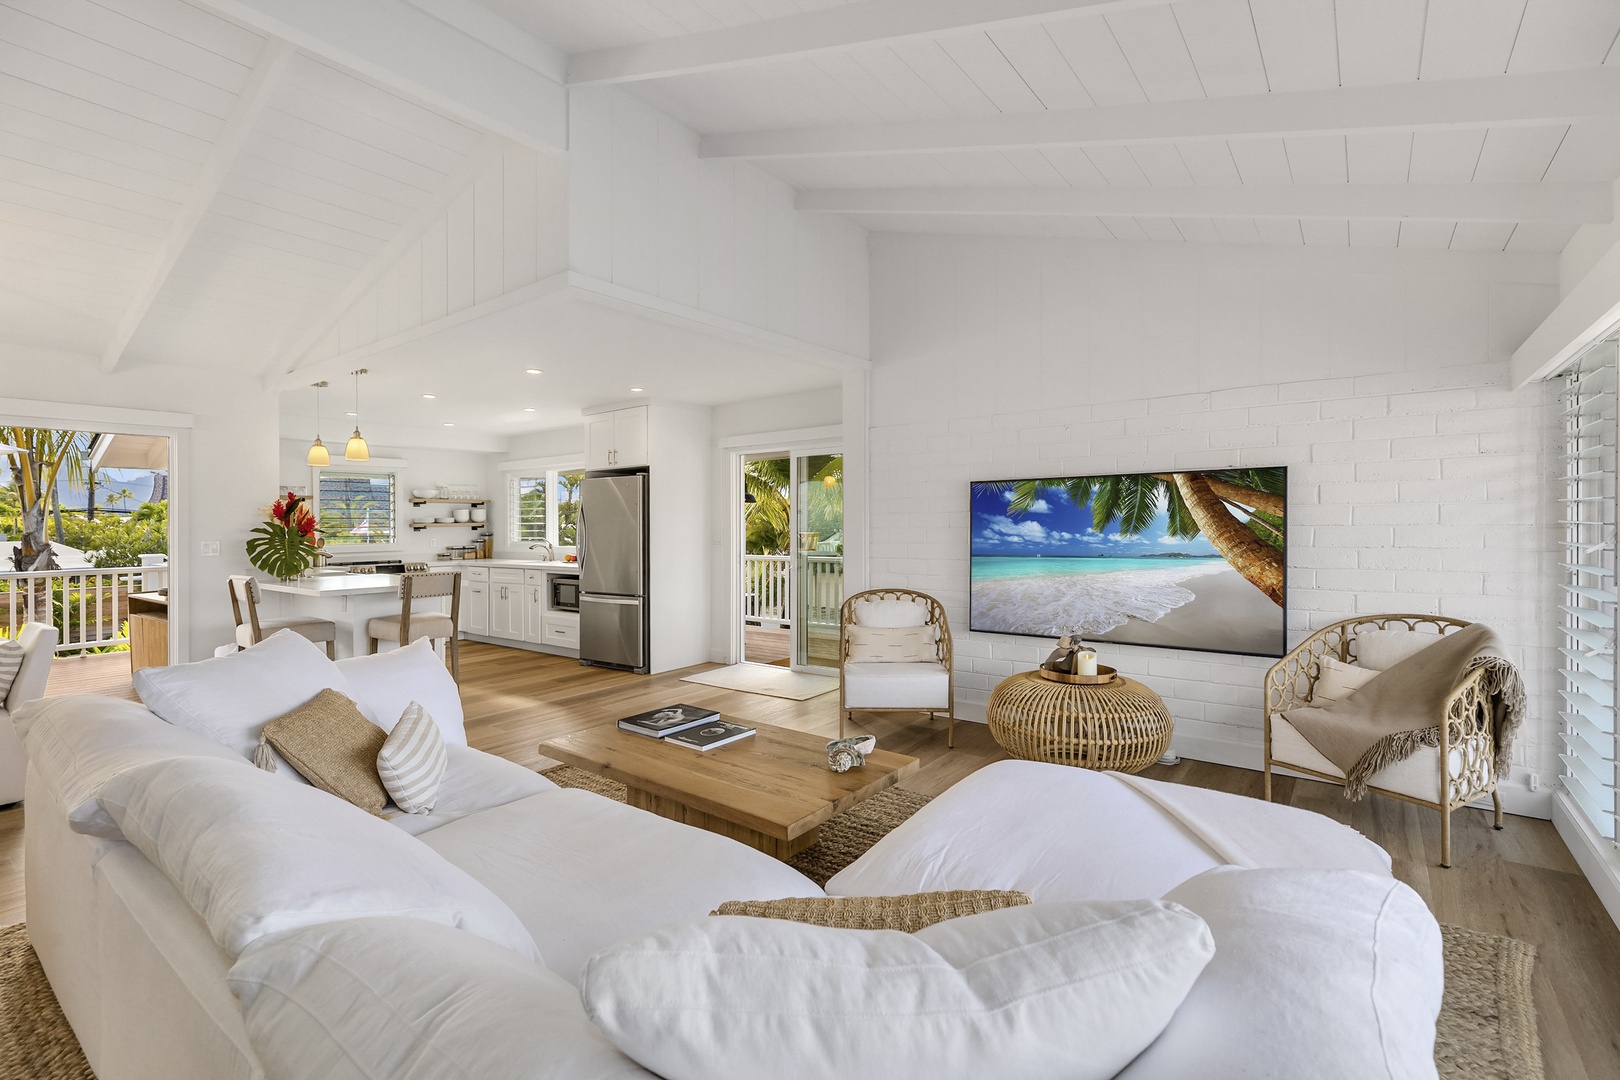 Kailua Vacation Rentals, Seahorse Estate - Enjoy a movie night or catch up on your favorite shows